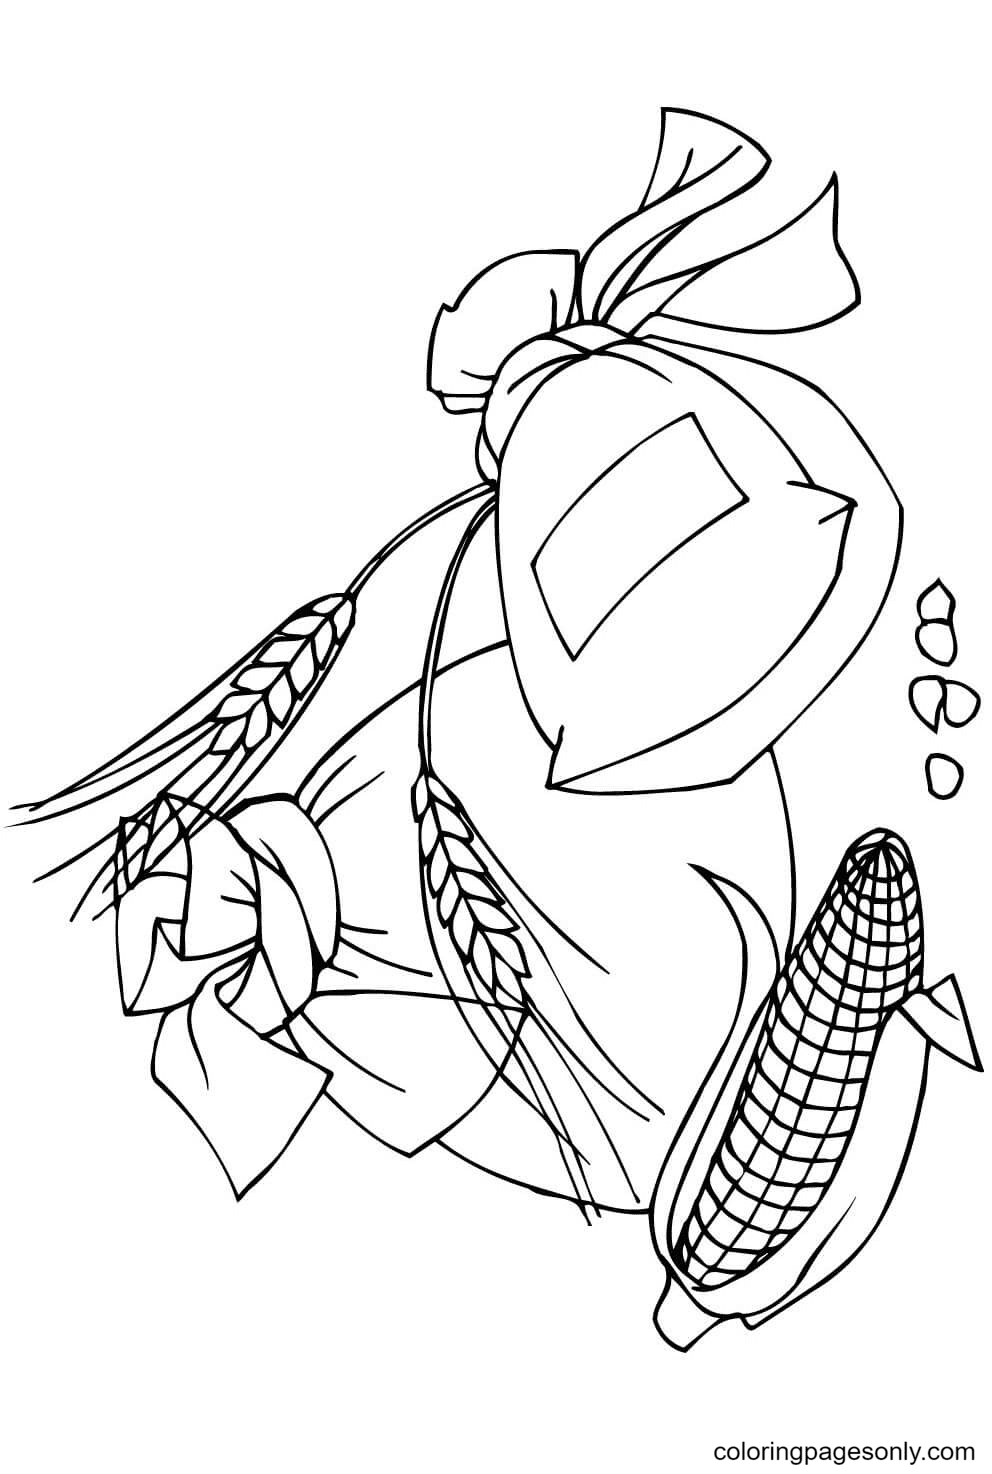 Spikelets Corncob and Flour Bags Coloring Pages - Thanksgiving Coloring  Pages - Coloring Pages For Kids And Adults